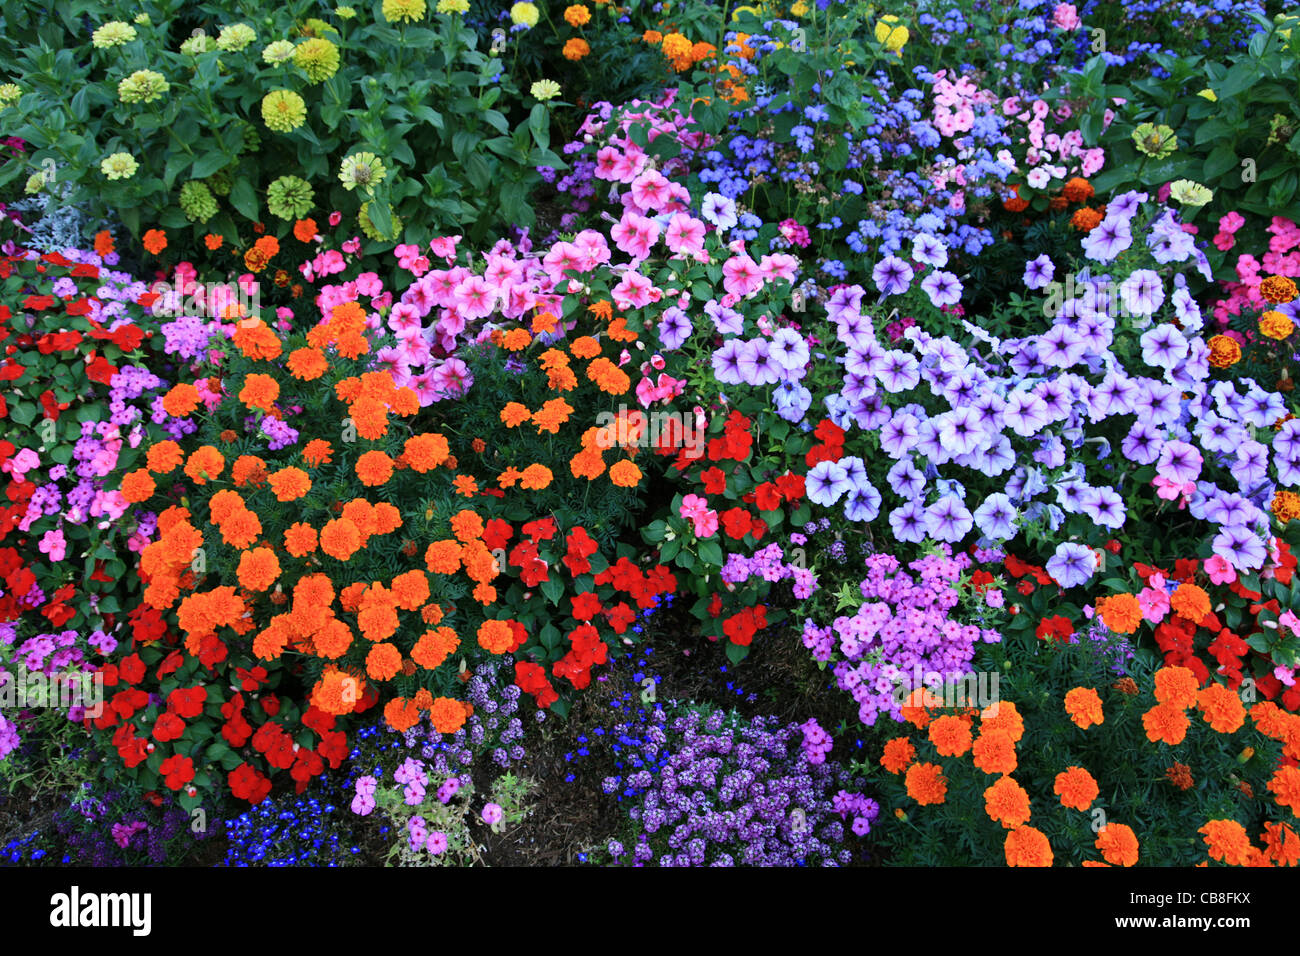 colorful flower bed background Stock Photo